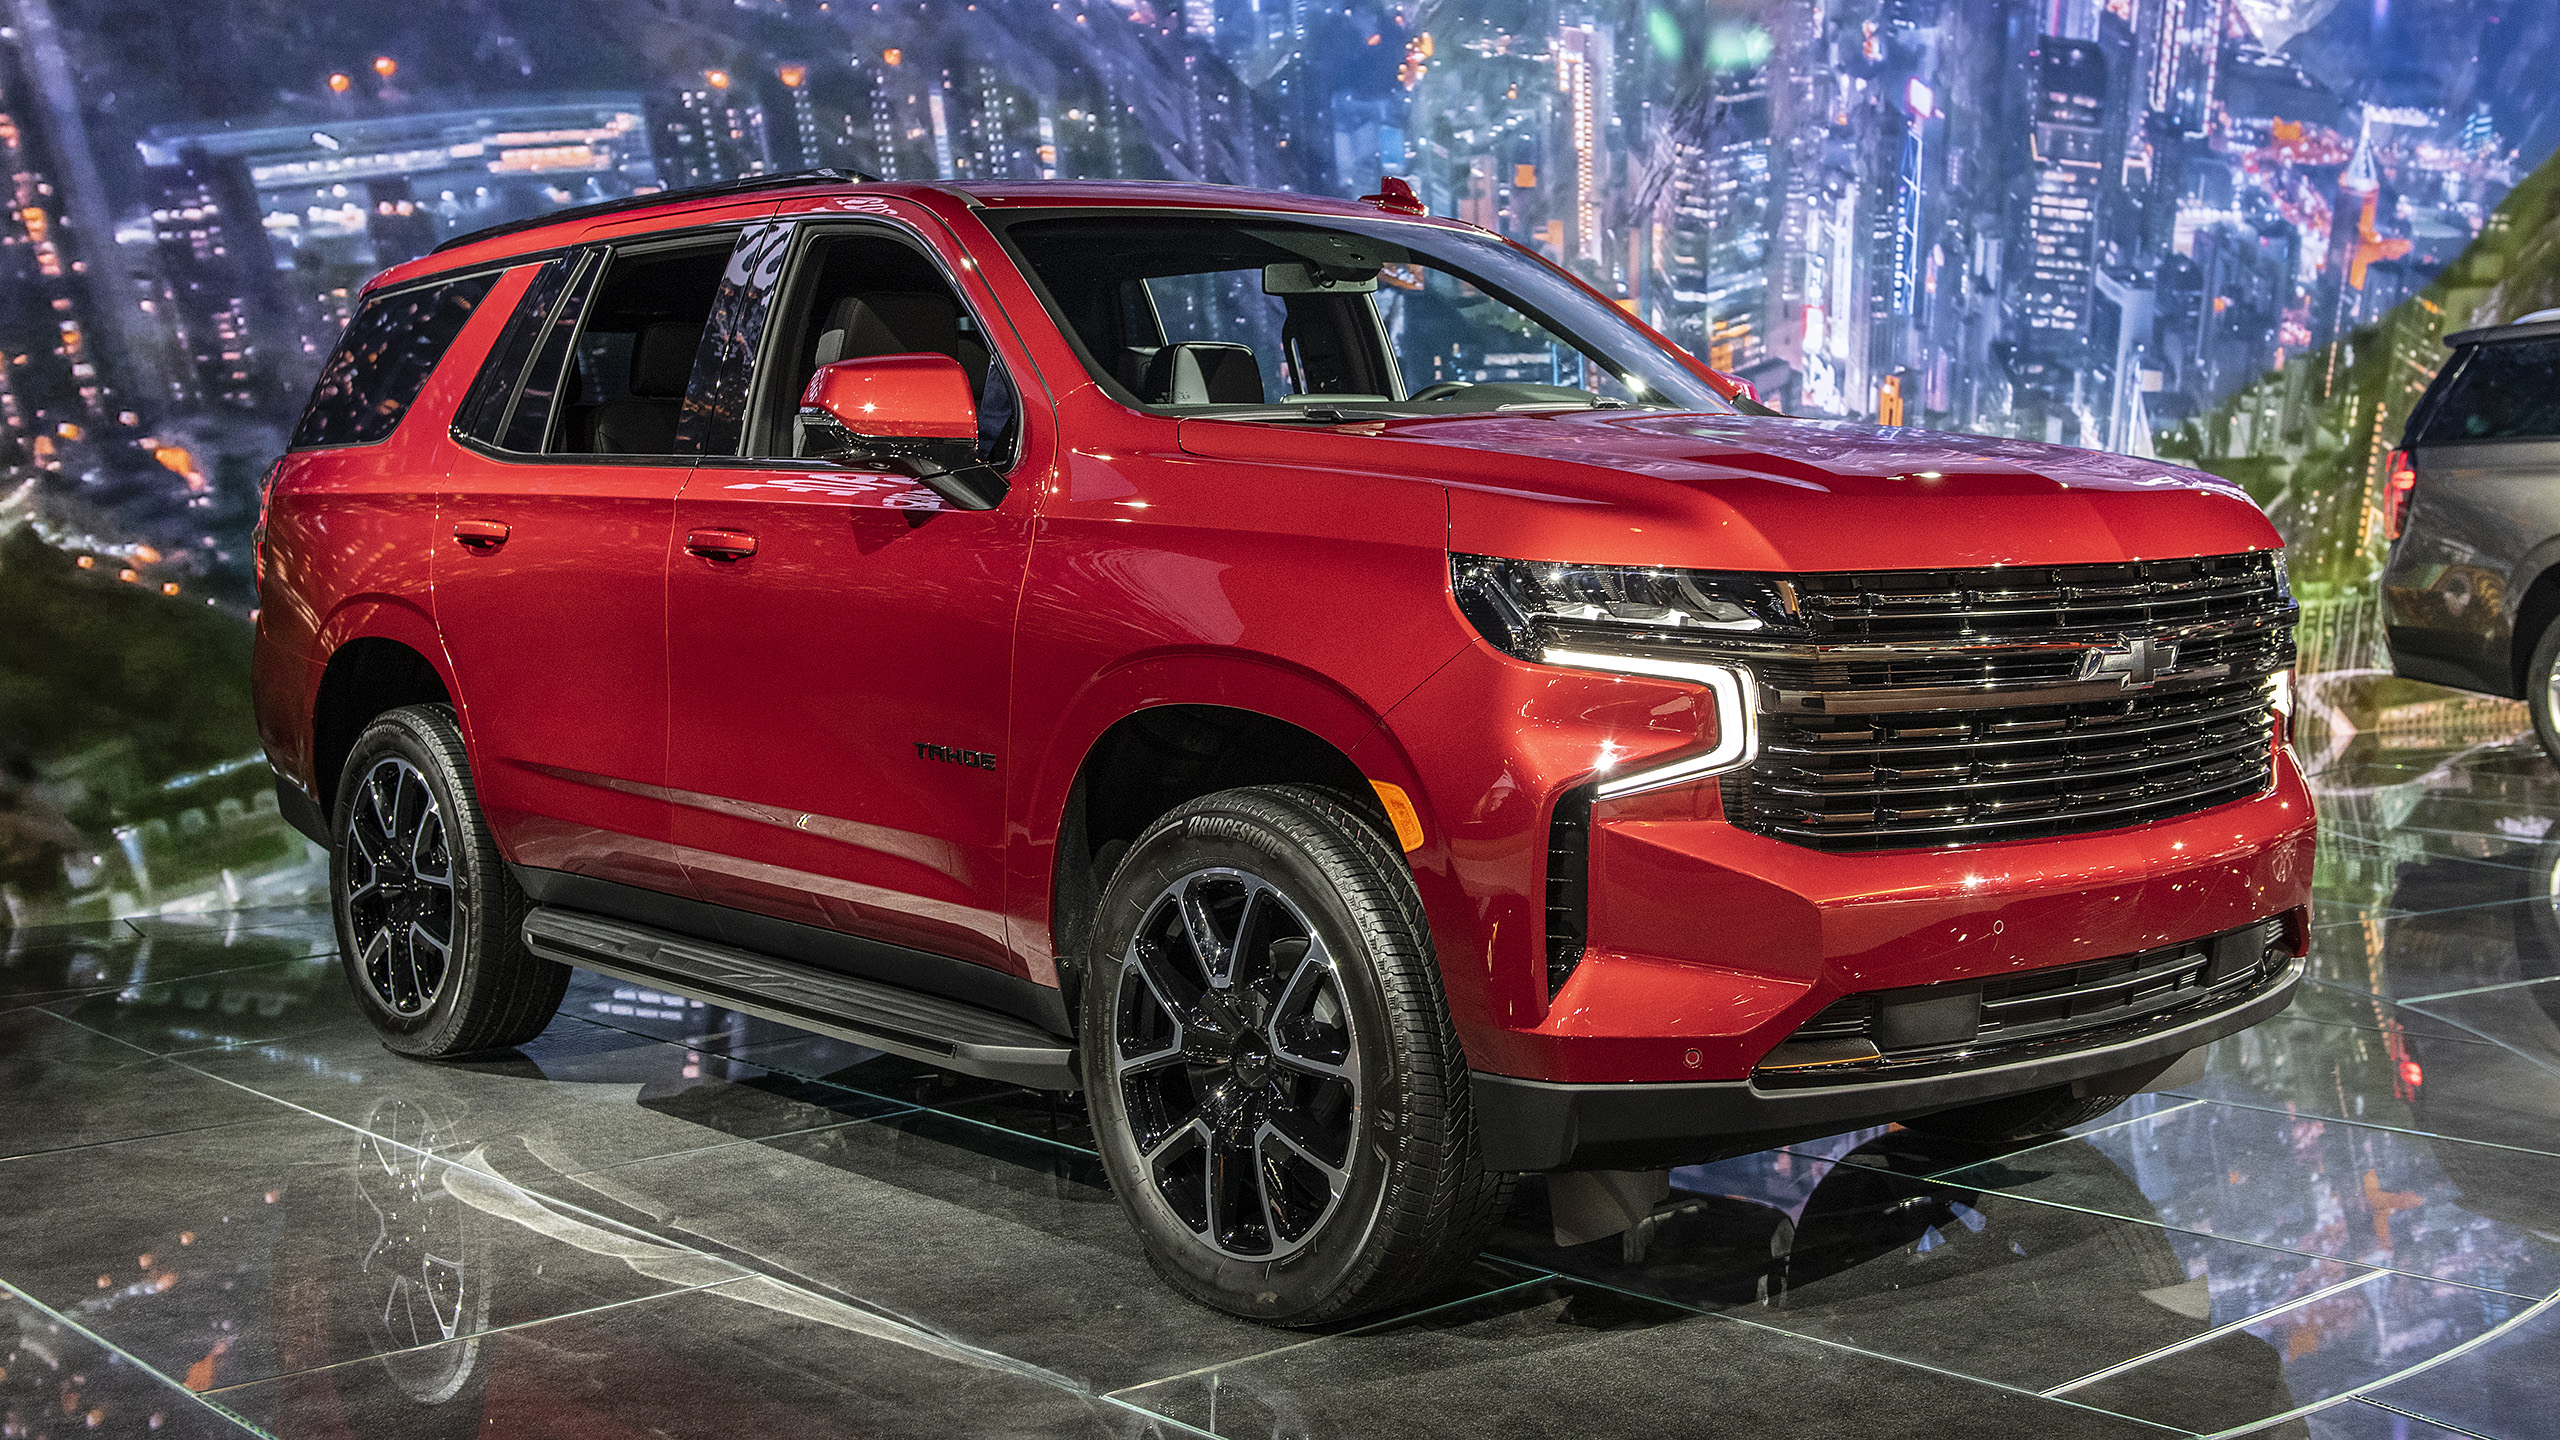 chevrolet-prices-2021-tahoe-from-50-295-up-1-000-from-2020-model